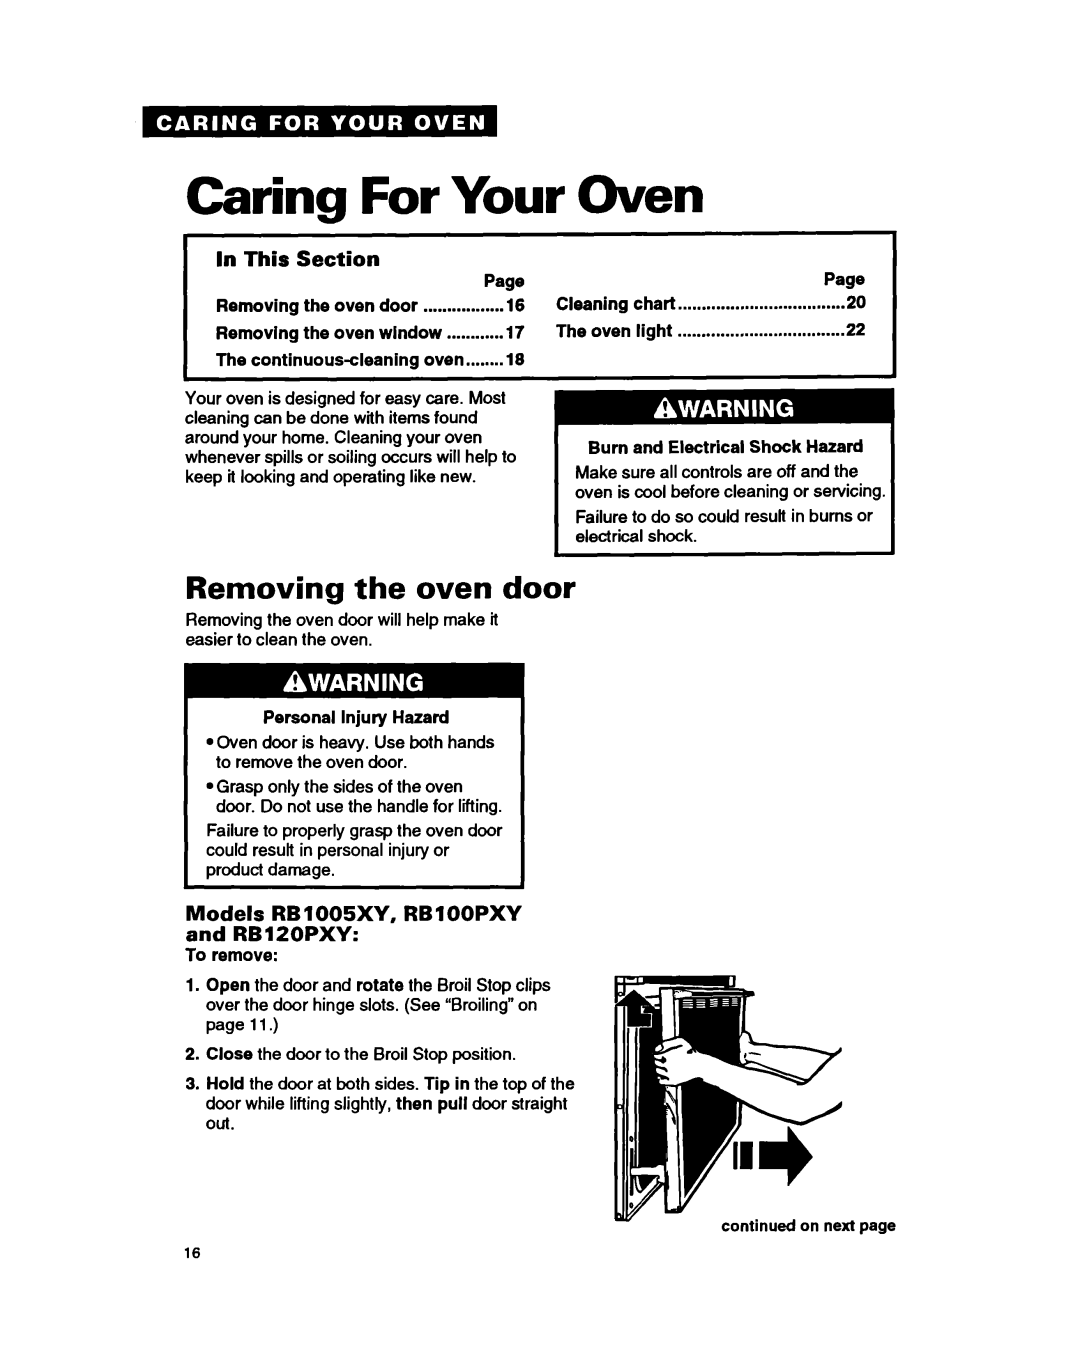 Whirlpool RBIZOPXY Caring For Your Oven, Removing the oven door, In This Section, Models RB1005XY, RBlOOPXY and RBlZOPXY 